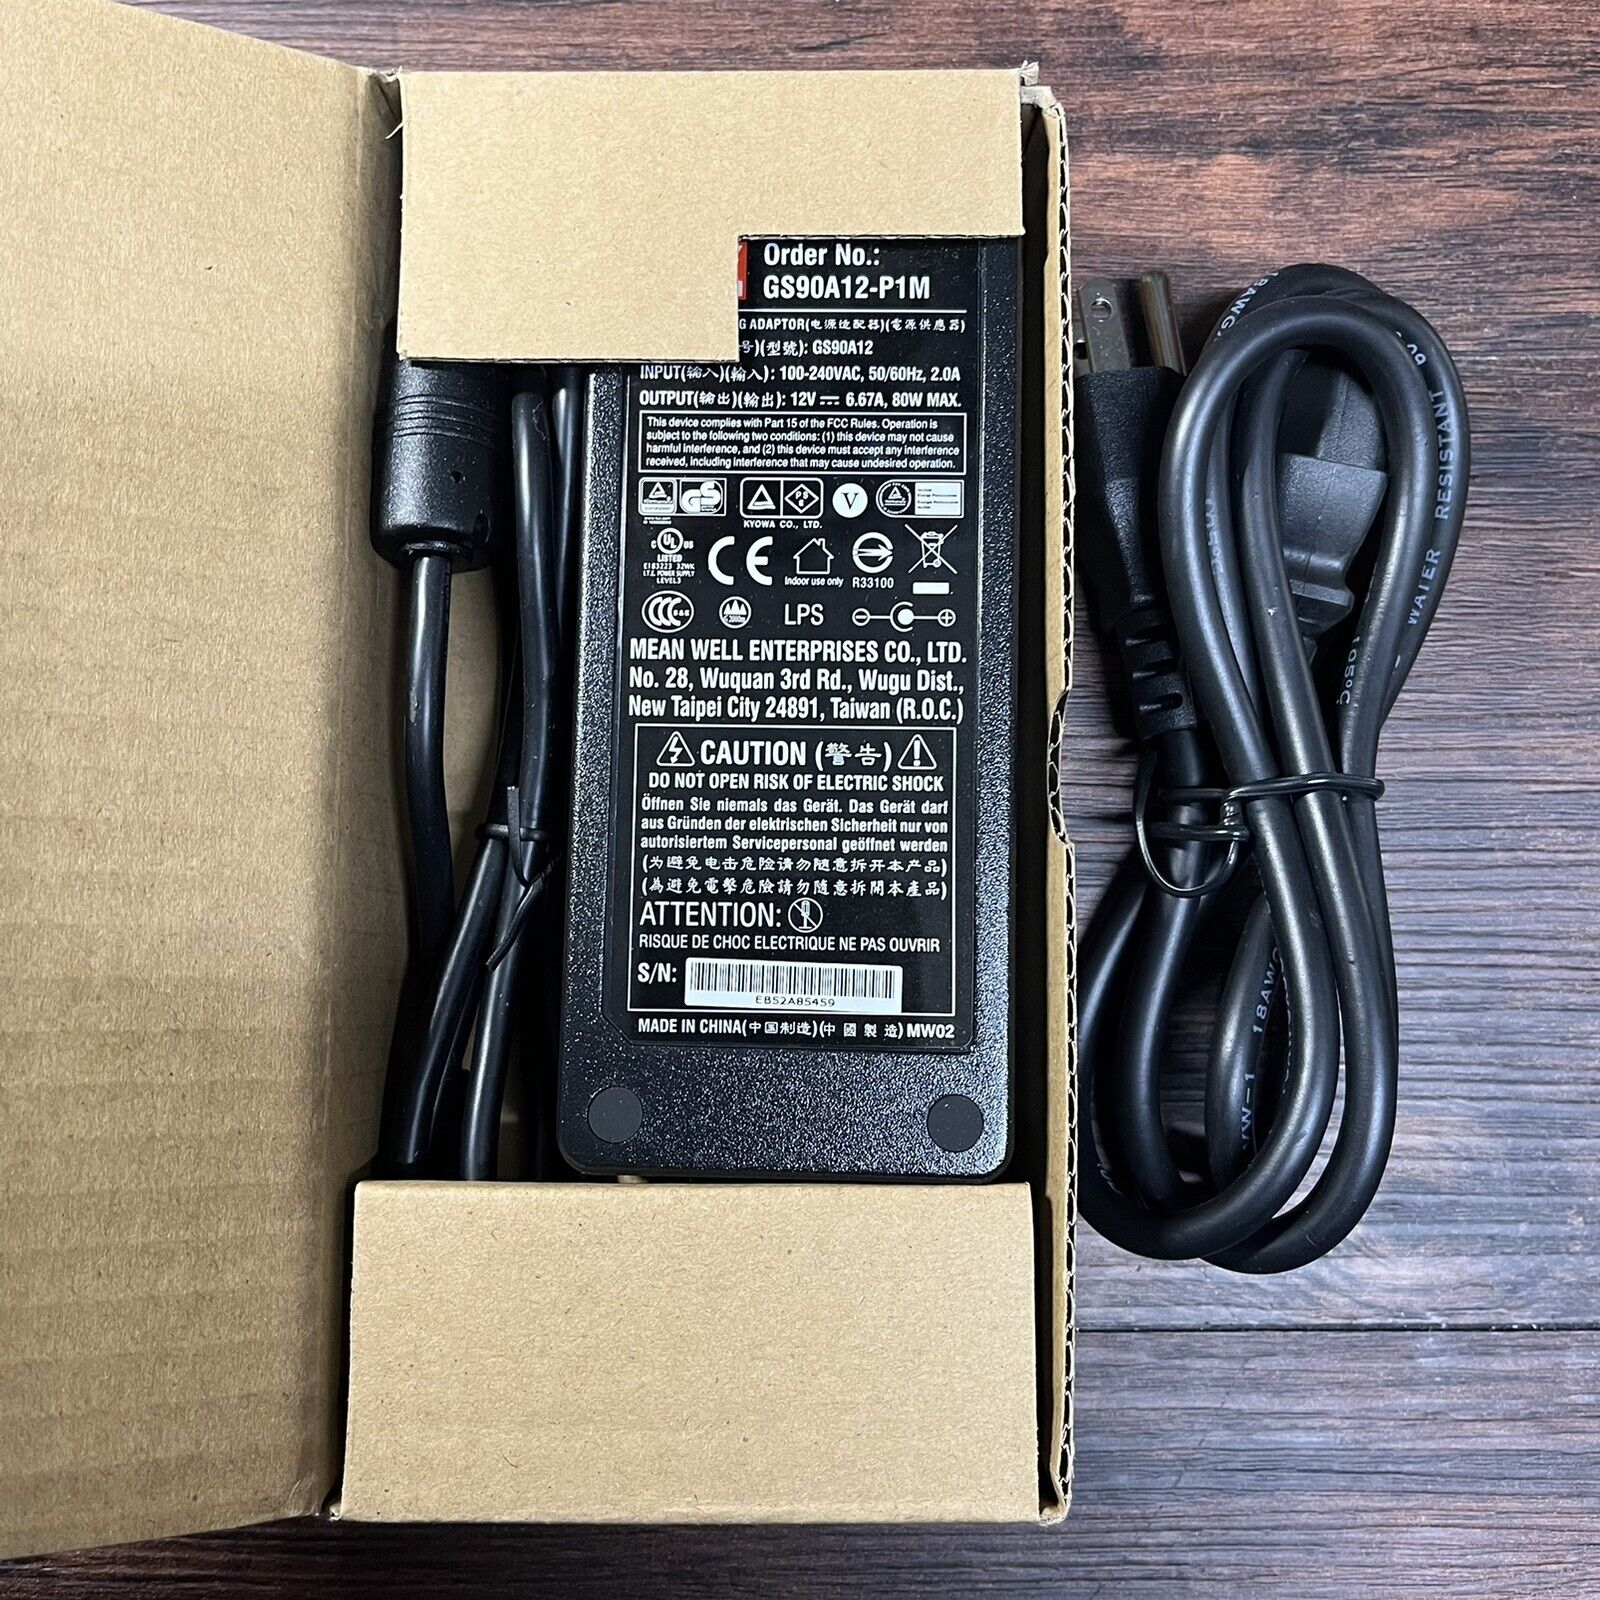 MEANWELL 12 Volt DC Switching Power Supply GS90A12-P1M AC Adapter Compatible Brand: Universal Connection Split/Duplica - Click Image to Close